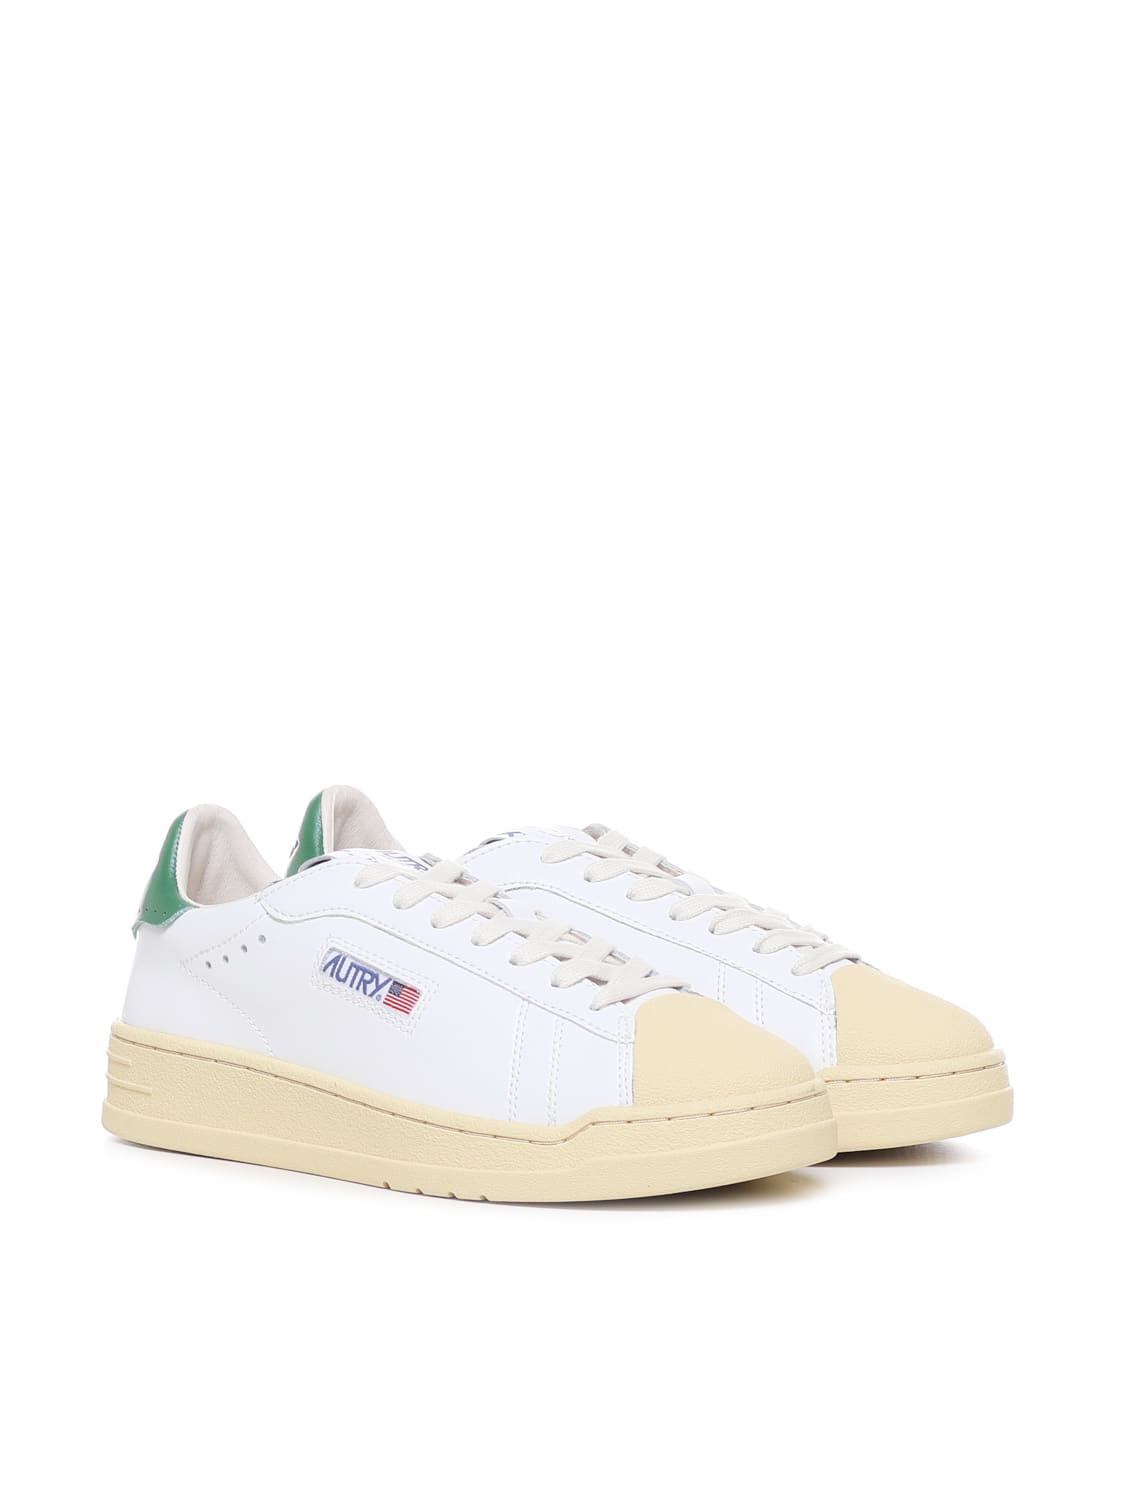 Shop Autry Bob Lutz Low Leather Sneakers In Bianco E Verde